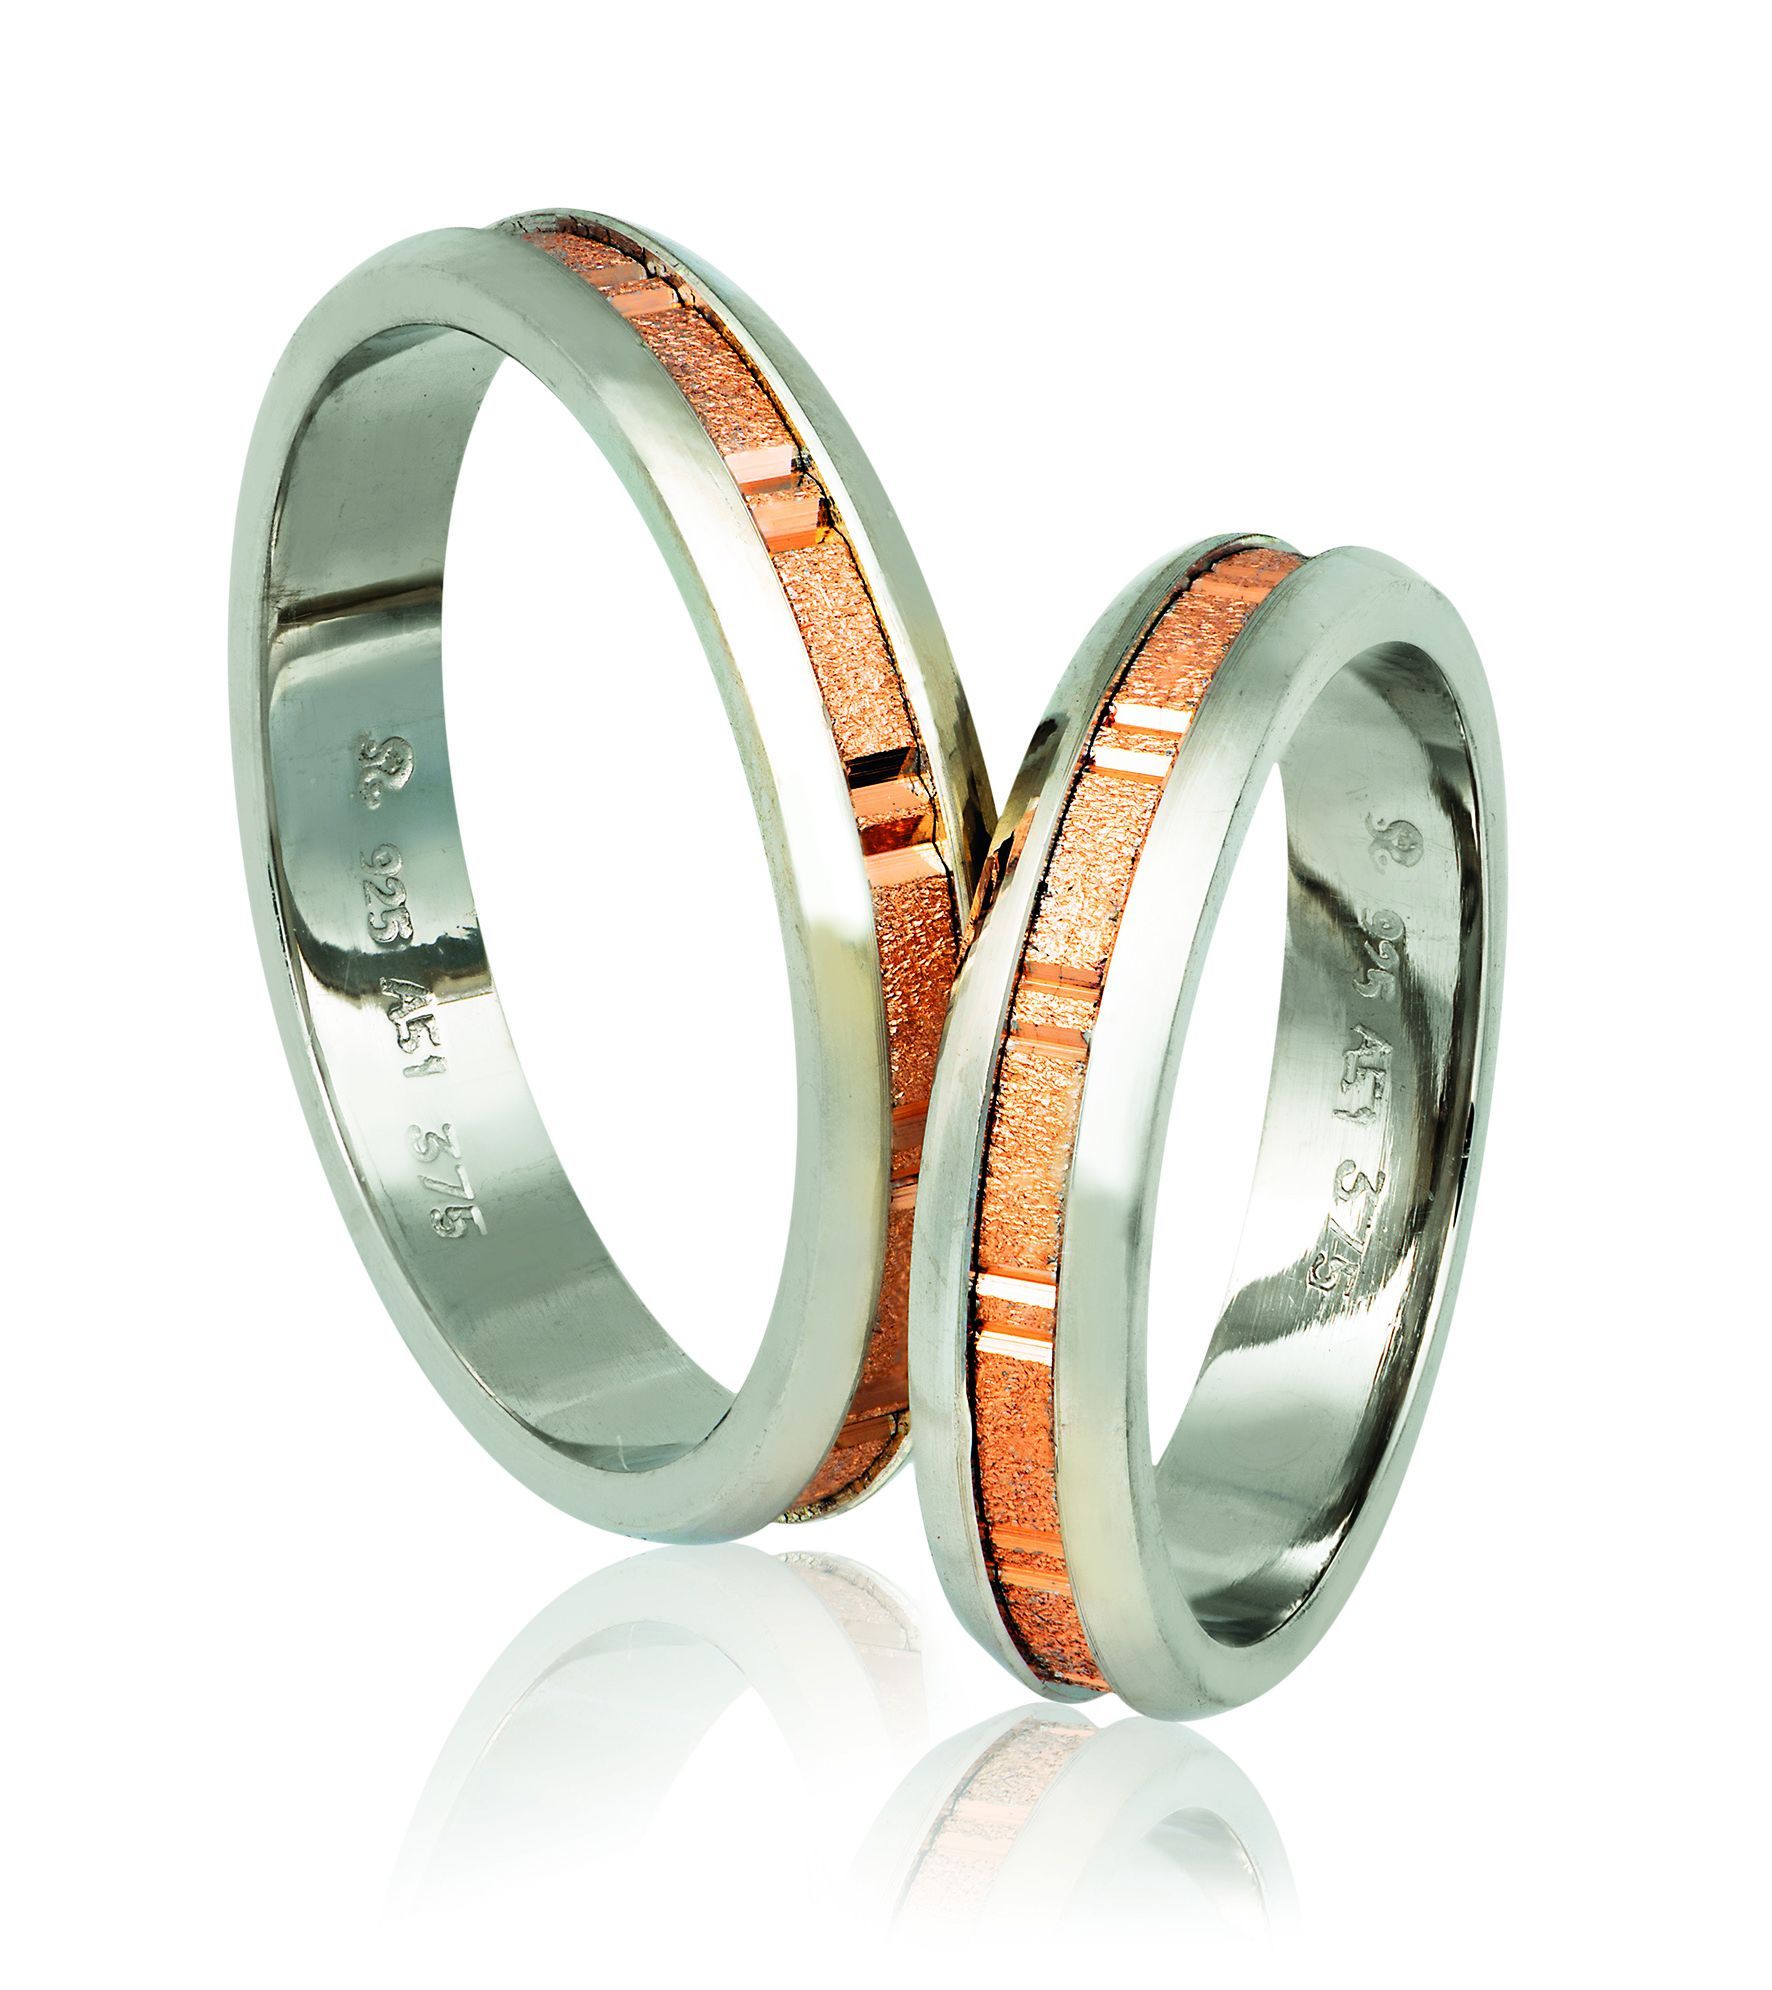 White gold & rose gold wedding rings 4.3mm (code A718r)